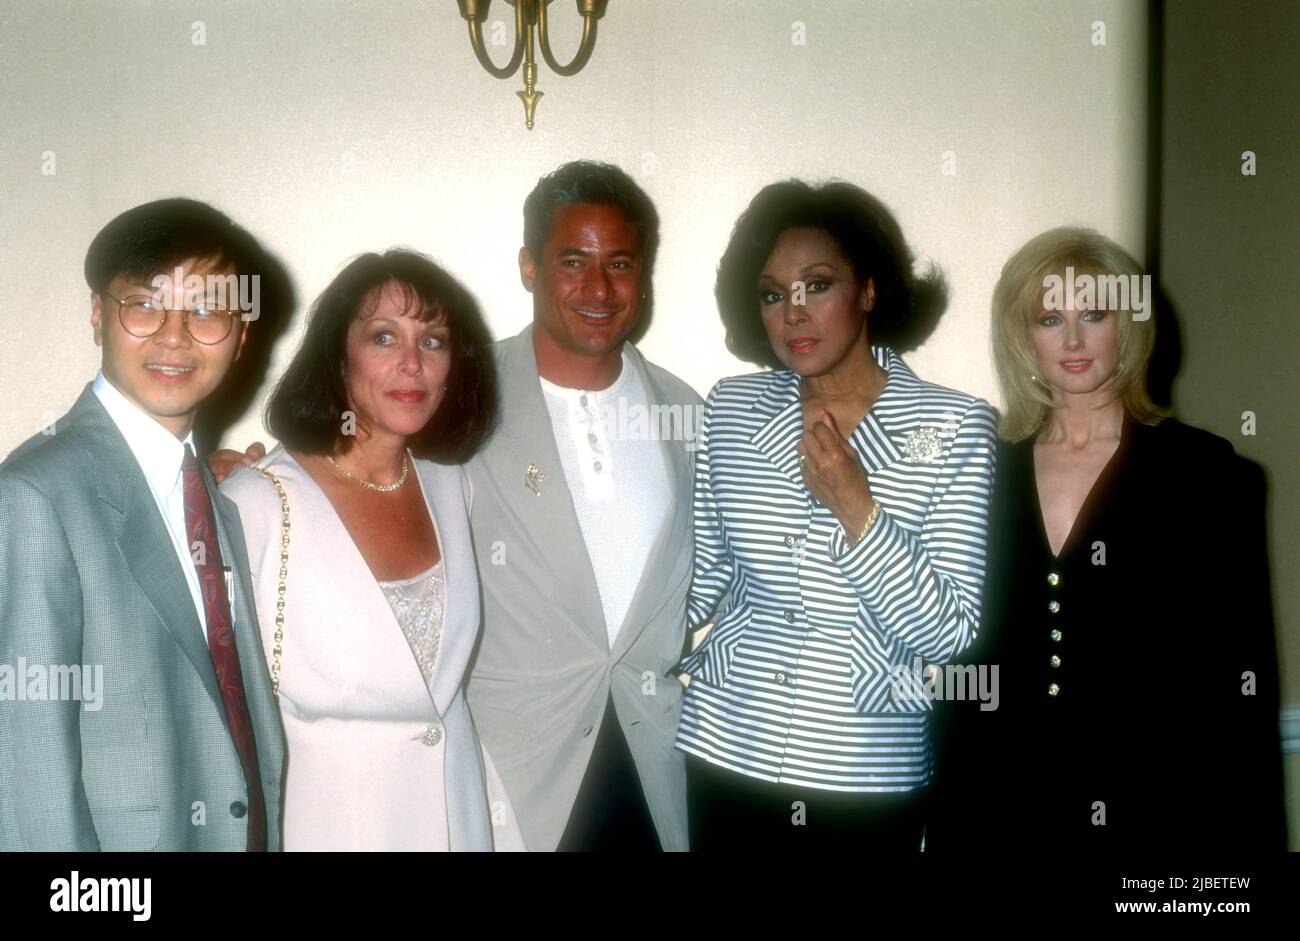 Beverly Hills, California, USA 17th June 1996 Olympian Athlete Greg Louganis, Actress Diahann Carroll and Actress Morgan Fairchild attend Project Inform Awards at The Beverly Hills hotel on June 17, 1996 in Beverly Hills, California, USA. Photo by Barry King/Alamy Stock Photo Stock Photo